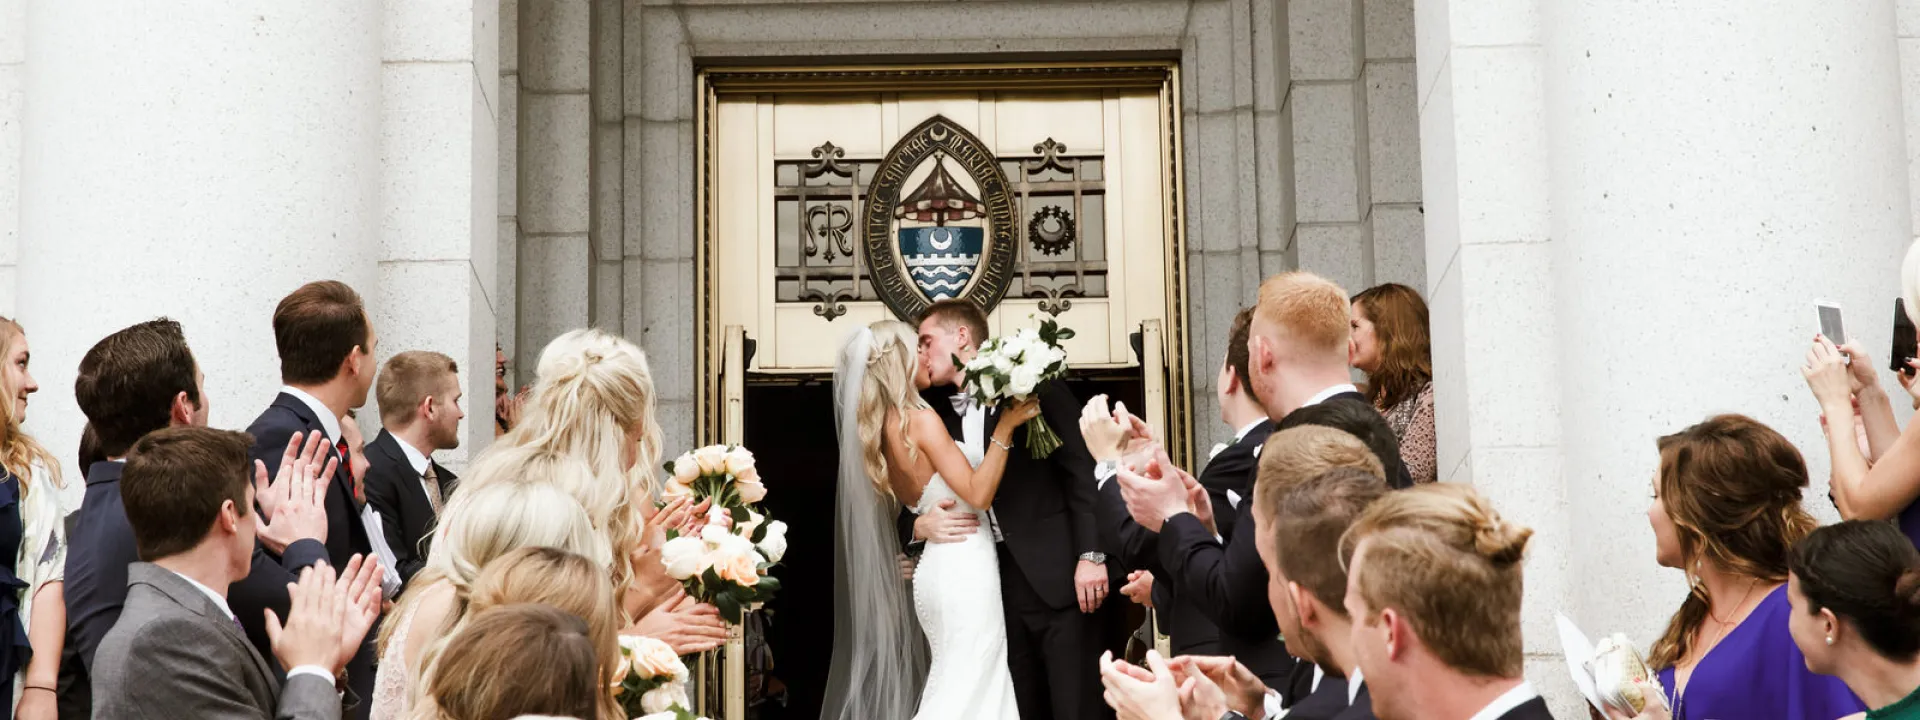 Wedding Photography at the Basilica in Minnesota